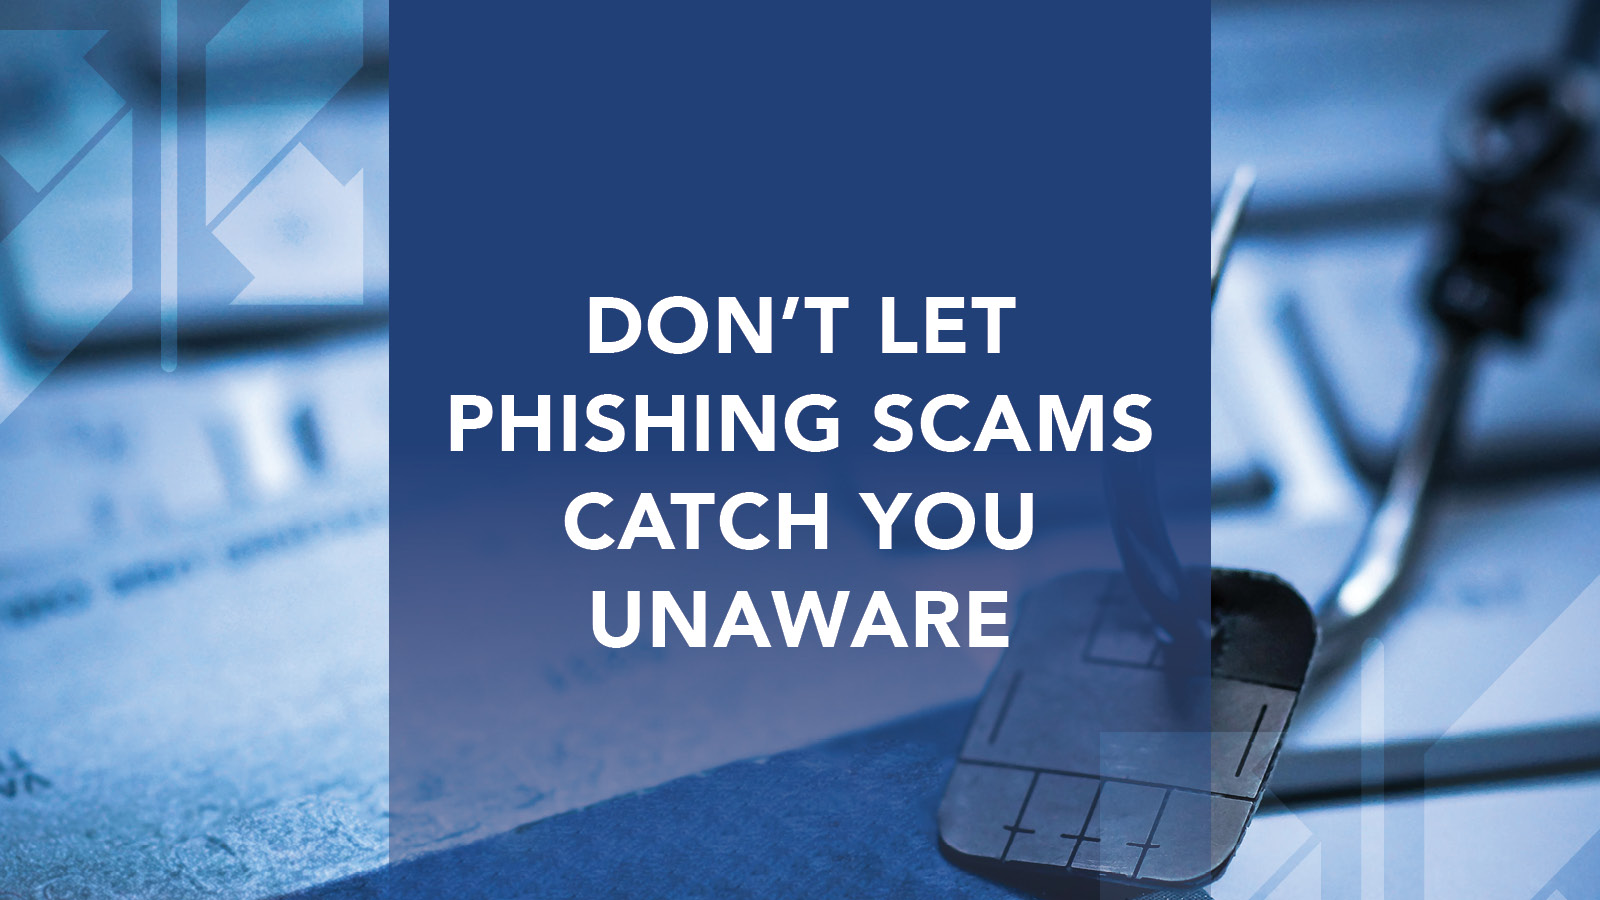 DON’T LET PHISHING SCAMS CATCH YOU UNAWARE